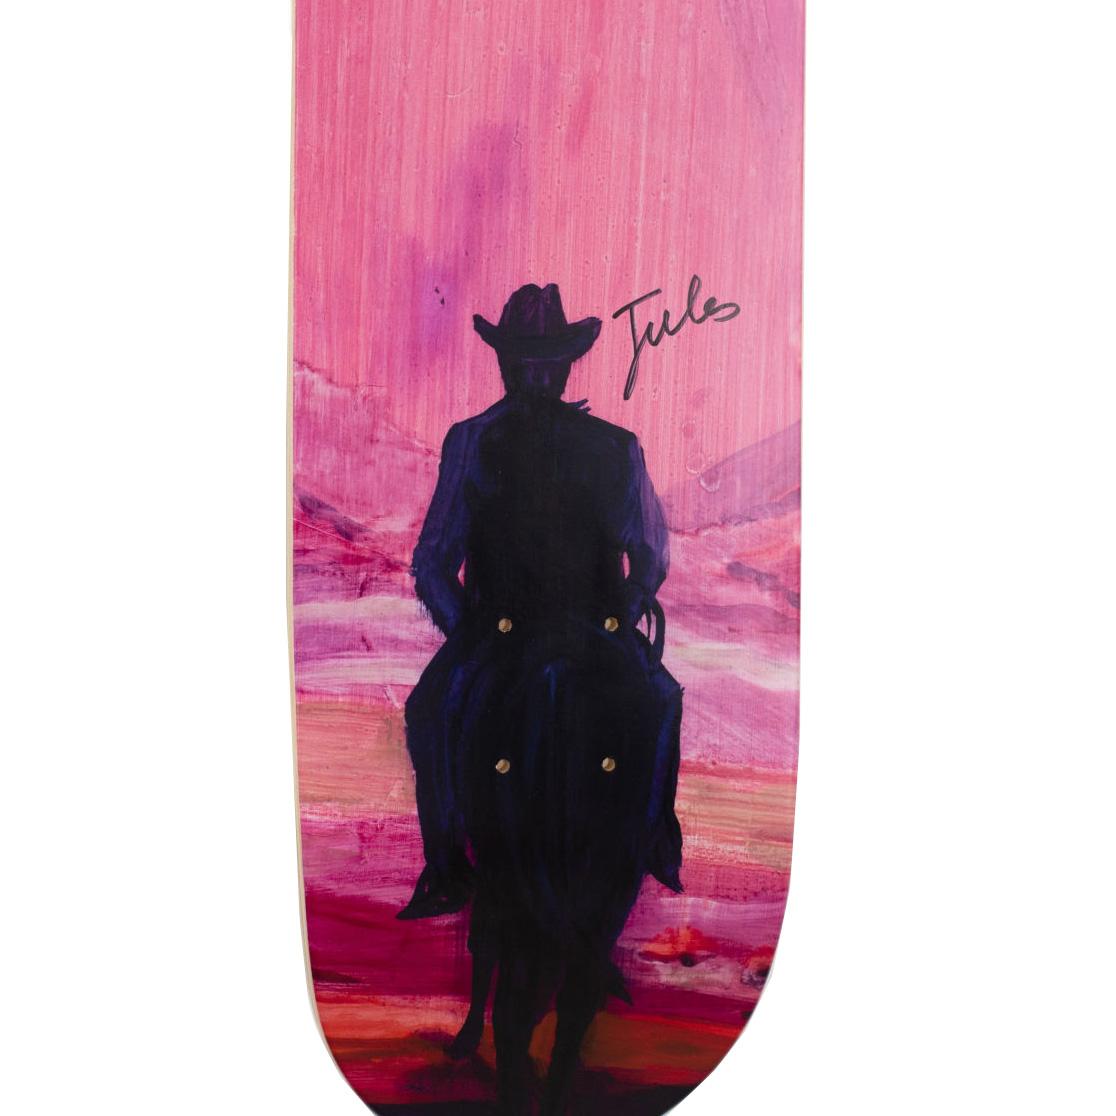 The Skateroom w/ Jules de Balincourt
Three skateboard decks
7-ply Canadian Maplewood with screen-print
31 H. x 8 inches
Mounting hardware included
Edition of 50
Hand-signed by the artist

This limited edition skateboard deck features the